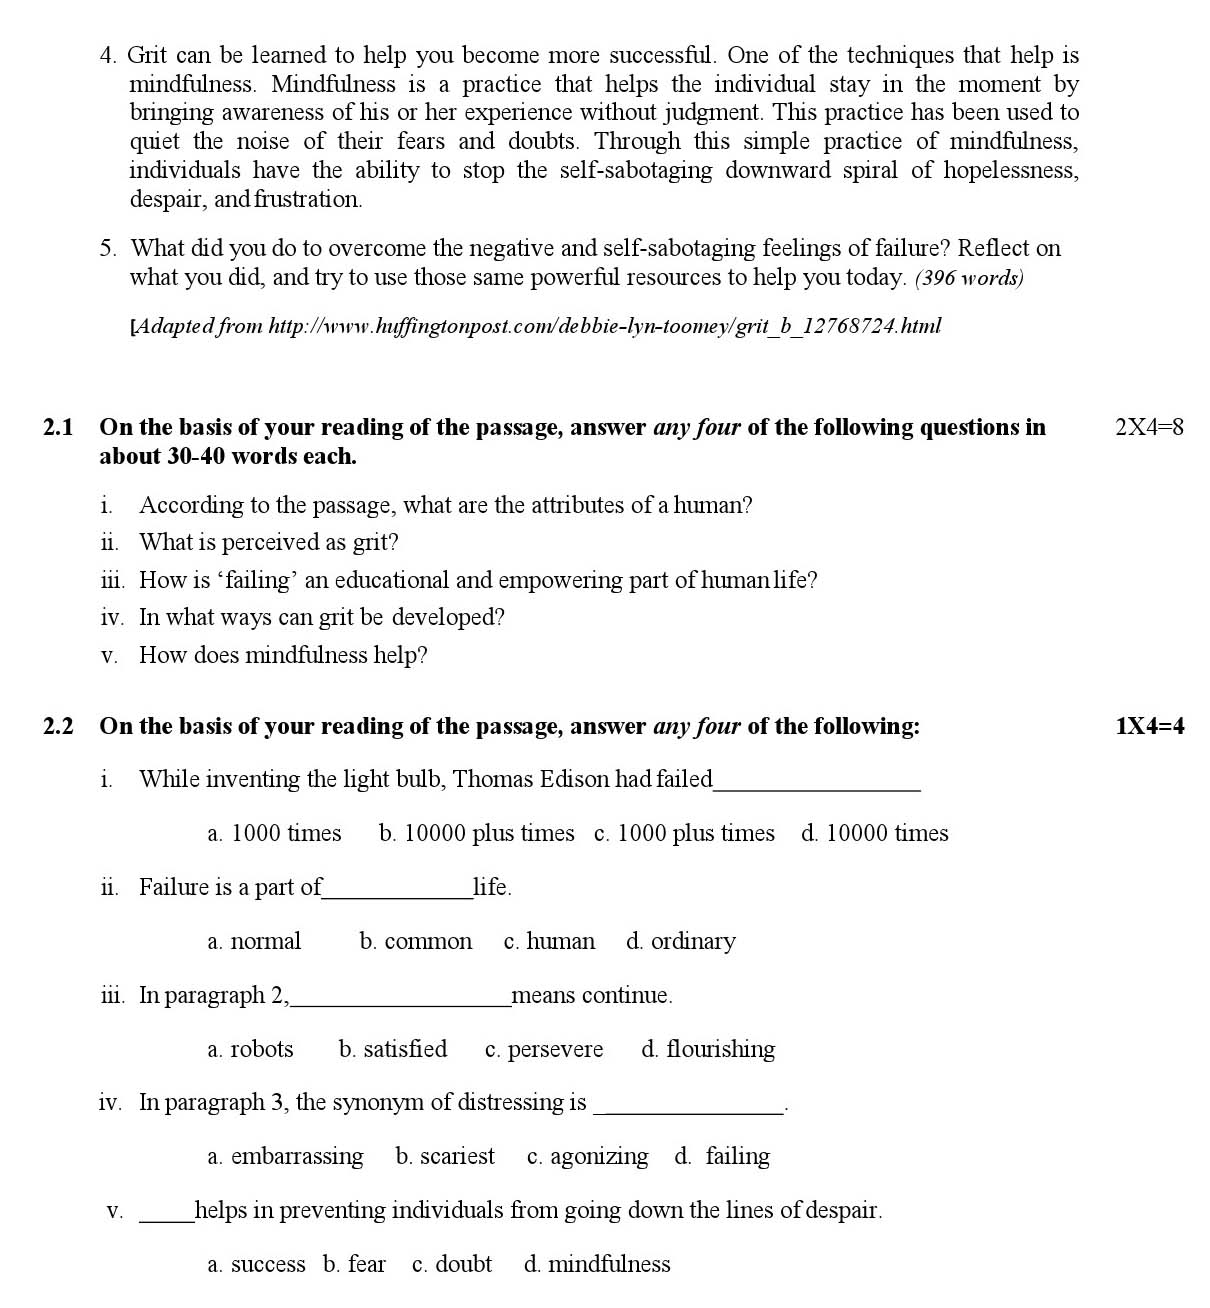 English Language and Literature CBSE Class X Sample Question Paper 2018-19 - Image 3